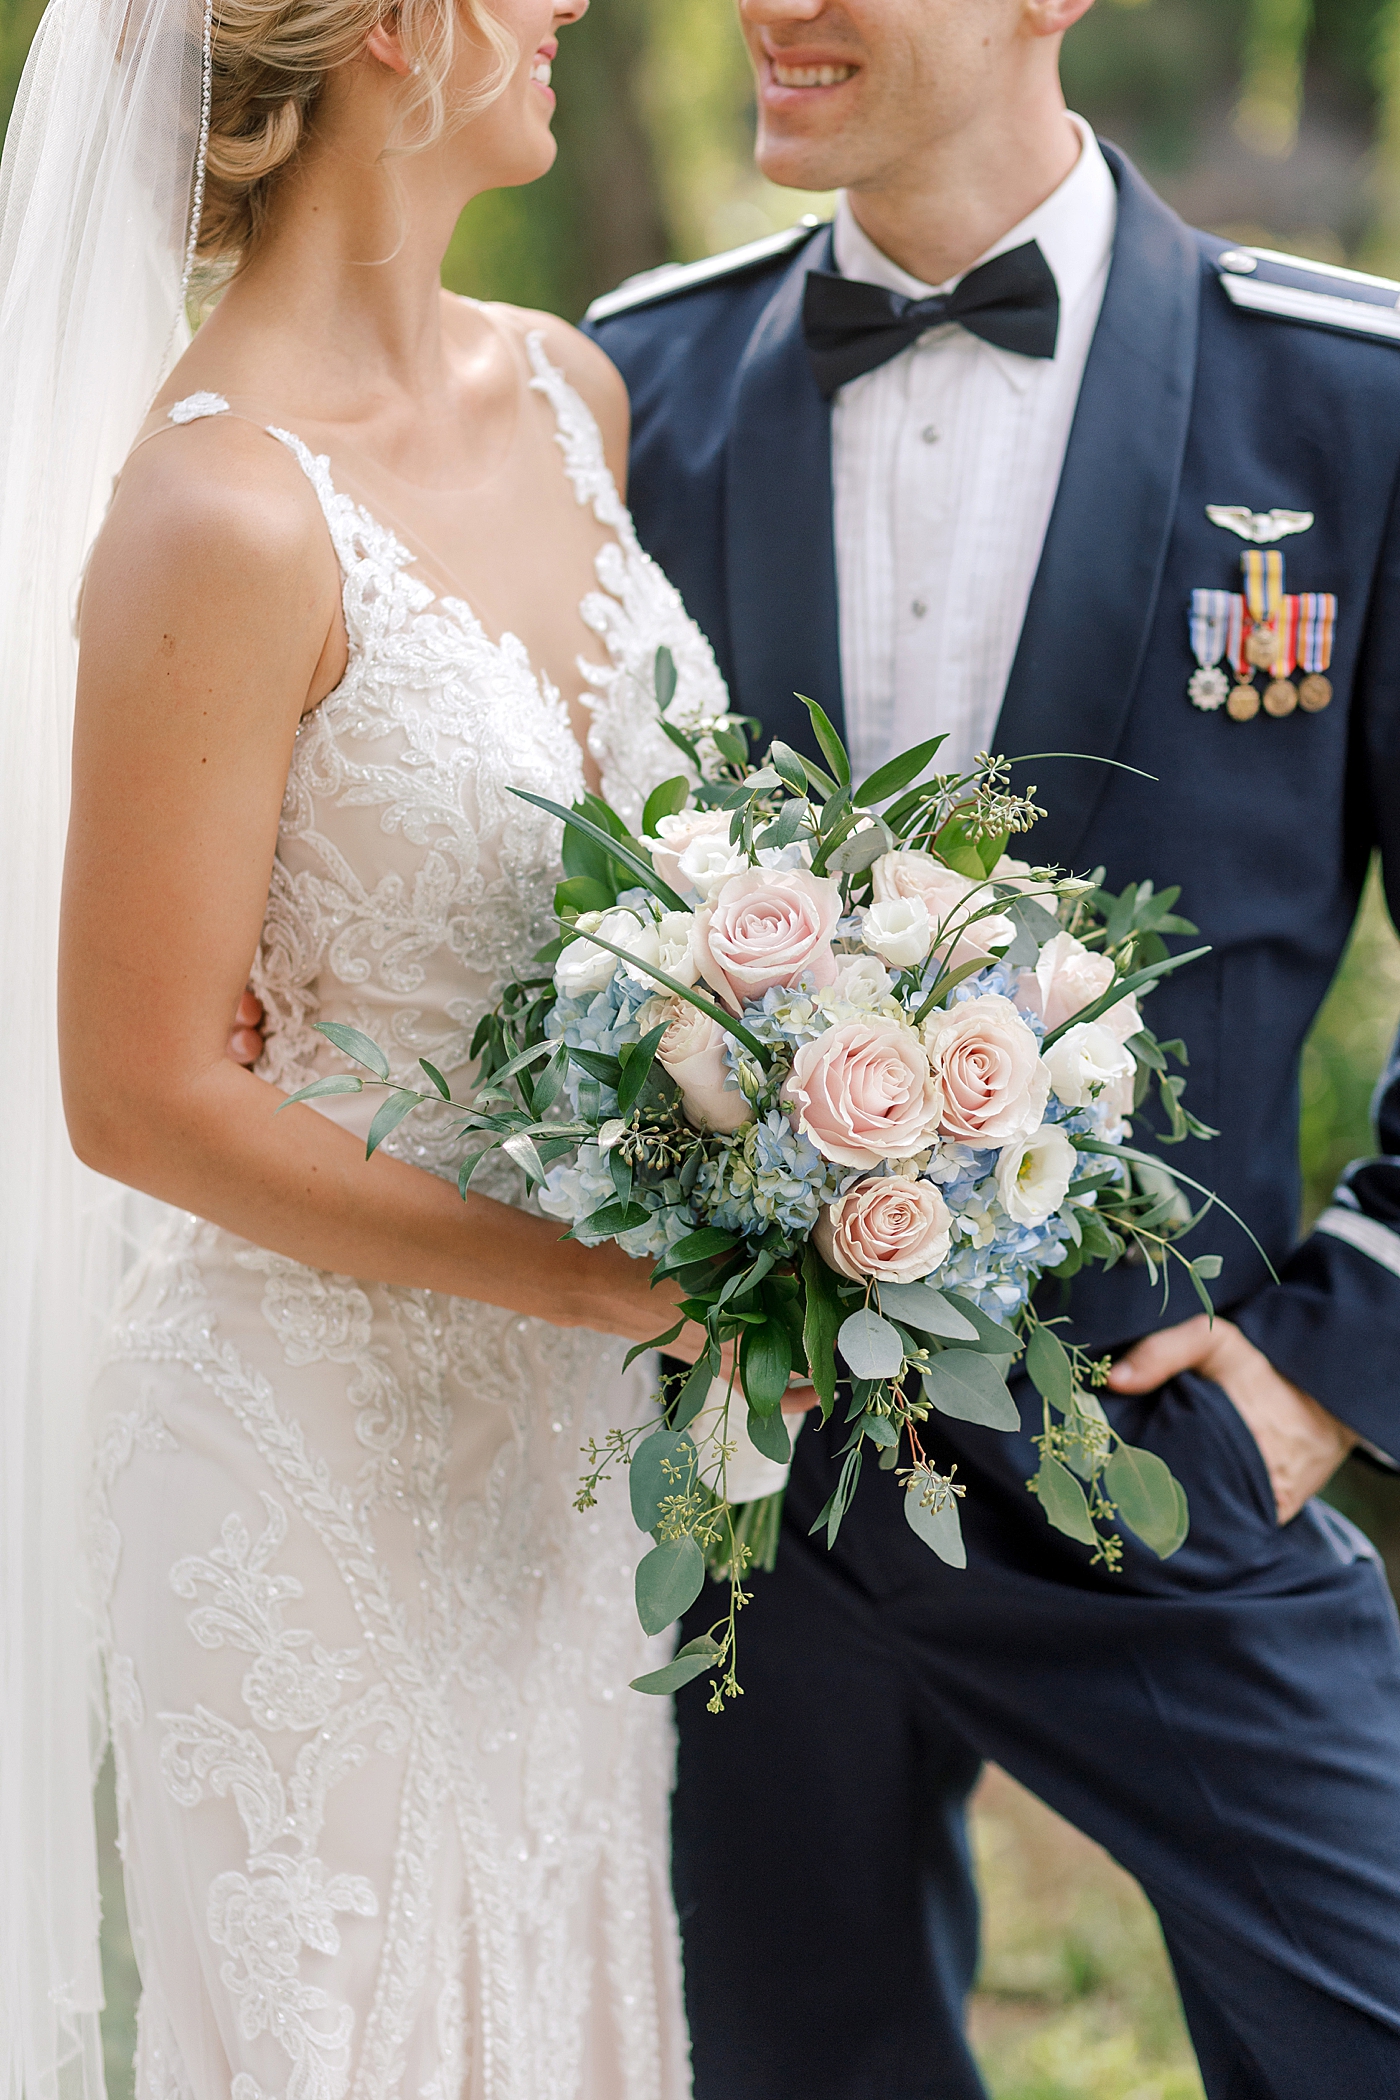 Detail of bride and groom holding a bouquet | Image by Hope Helmuth Photography